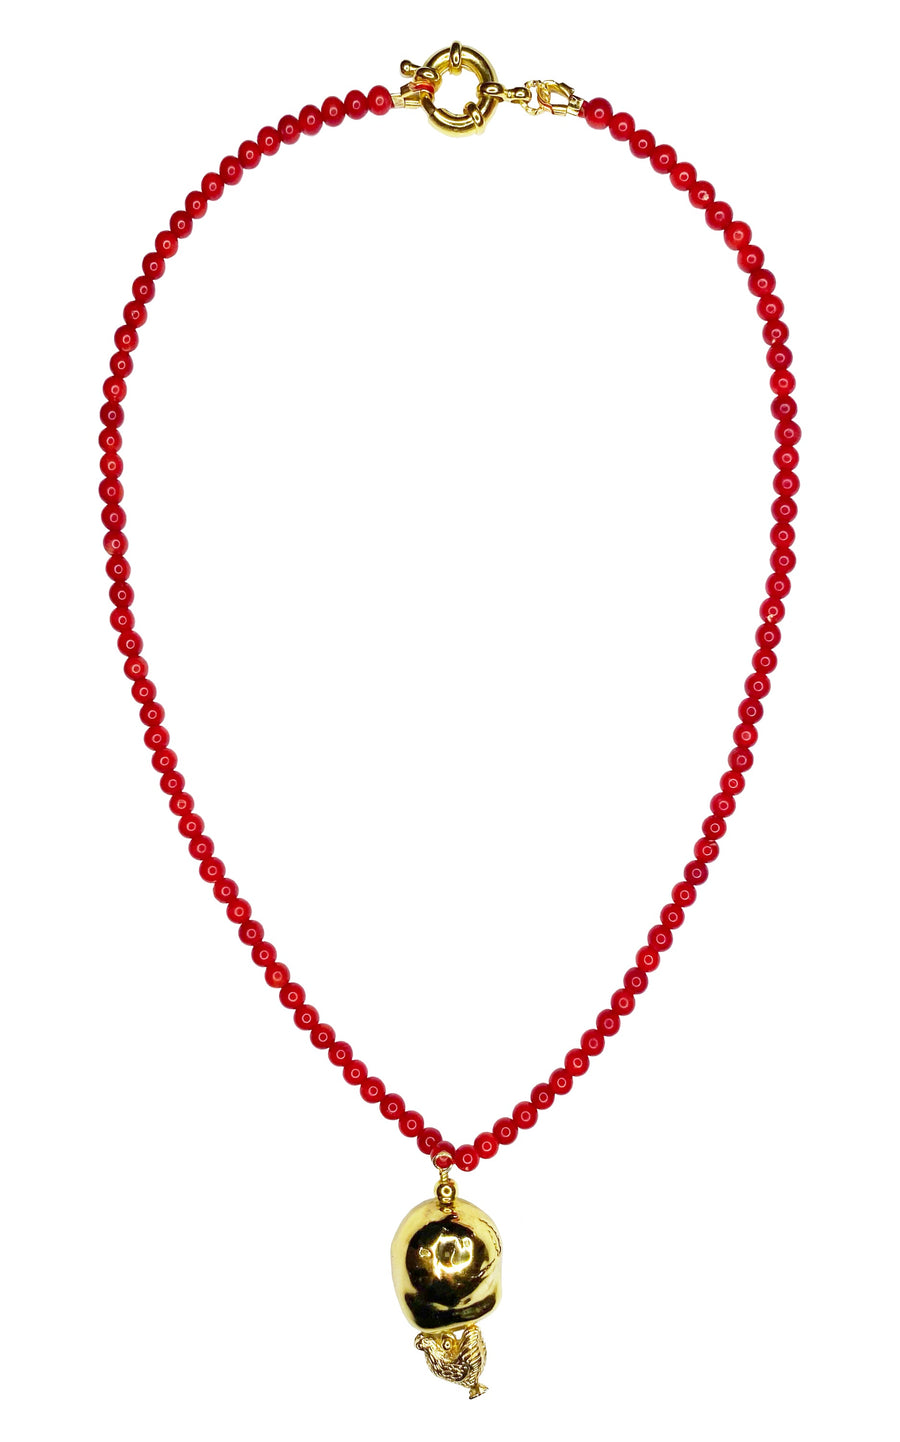 Coral and golden pearl amulette necklace